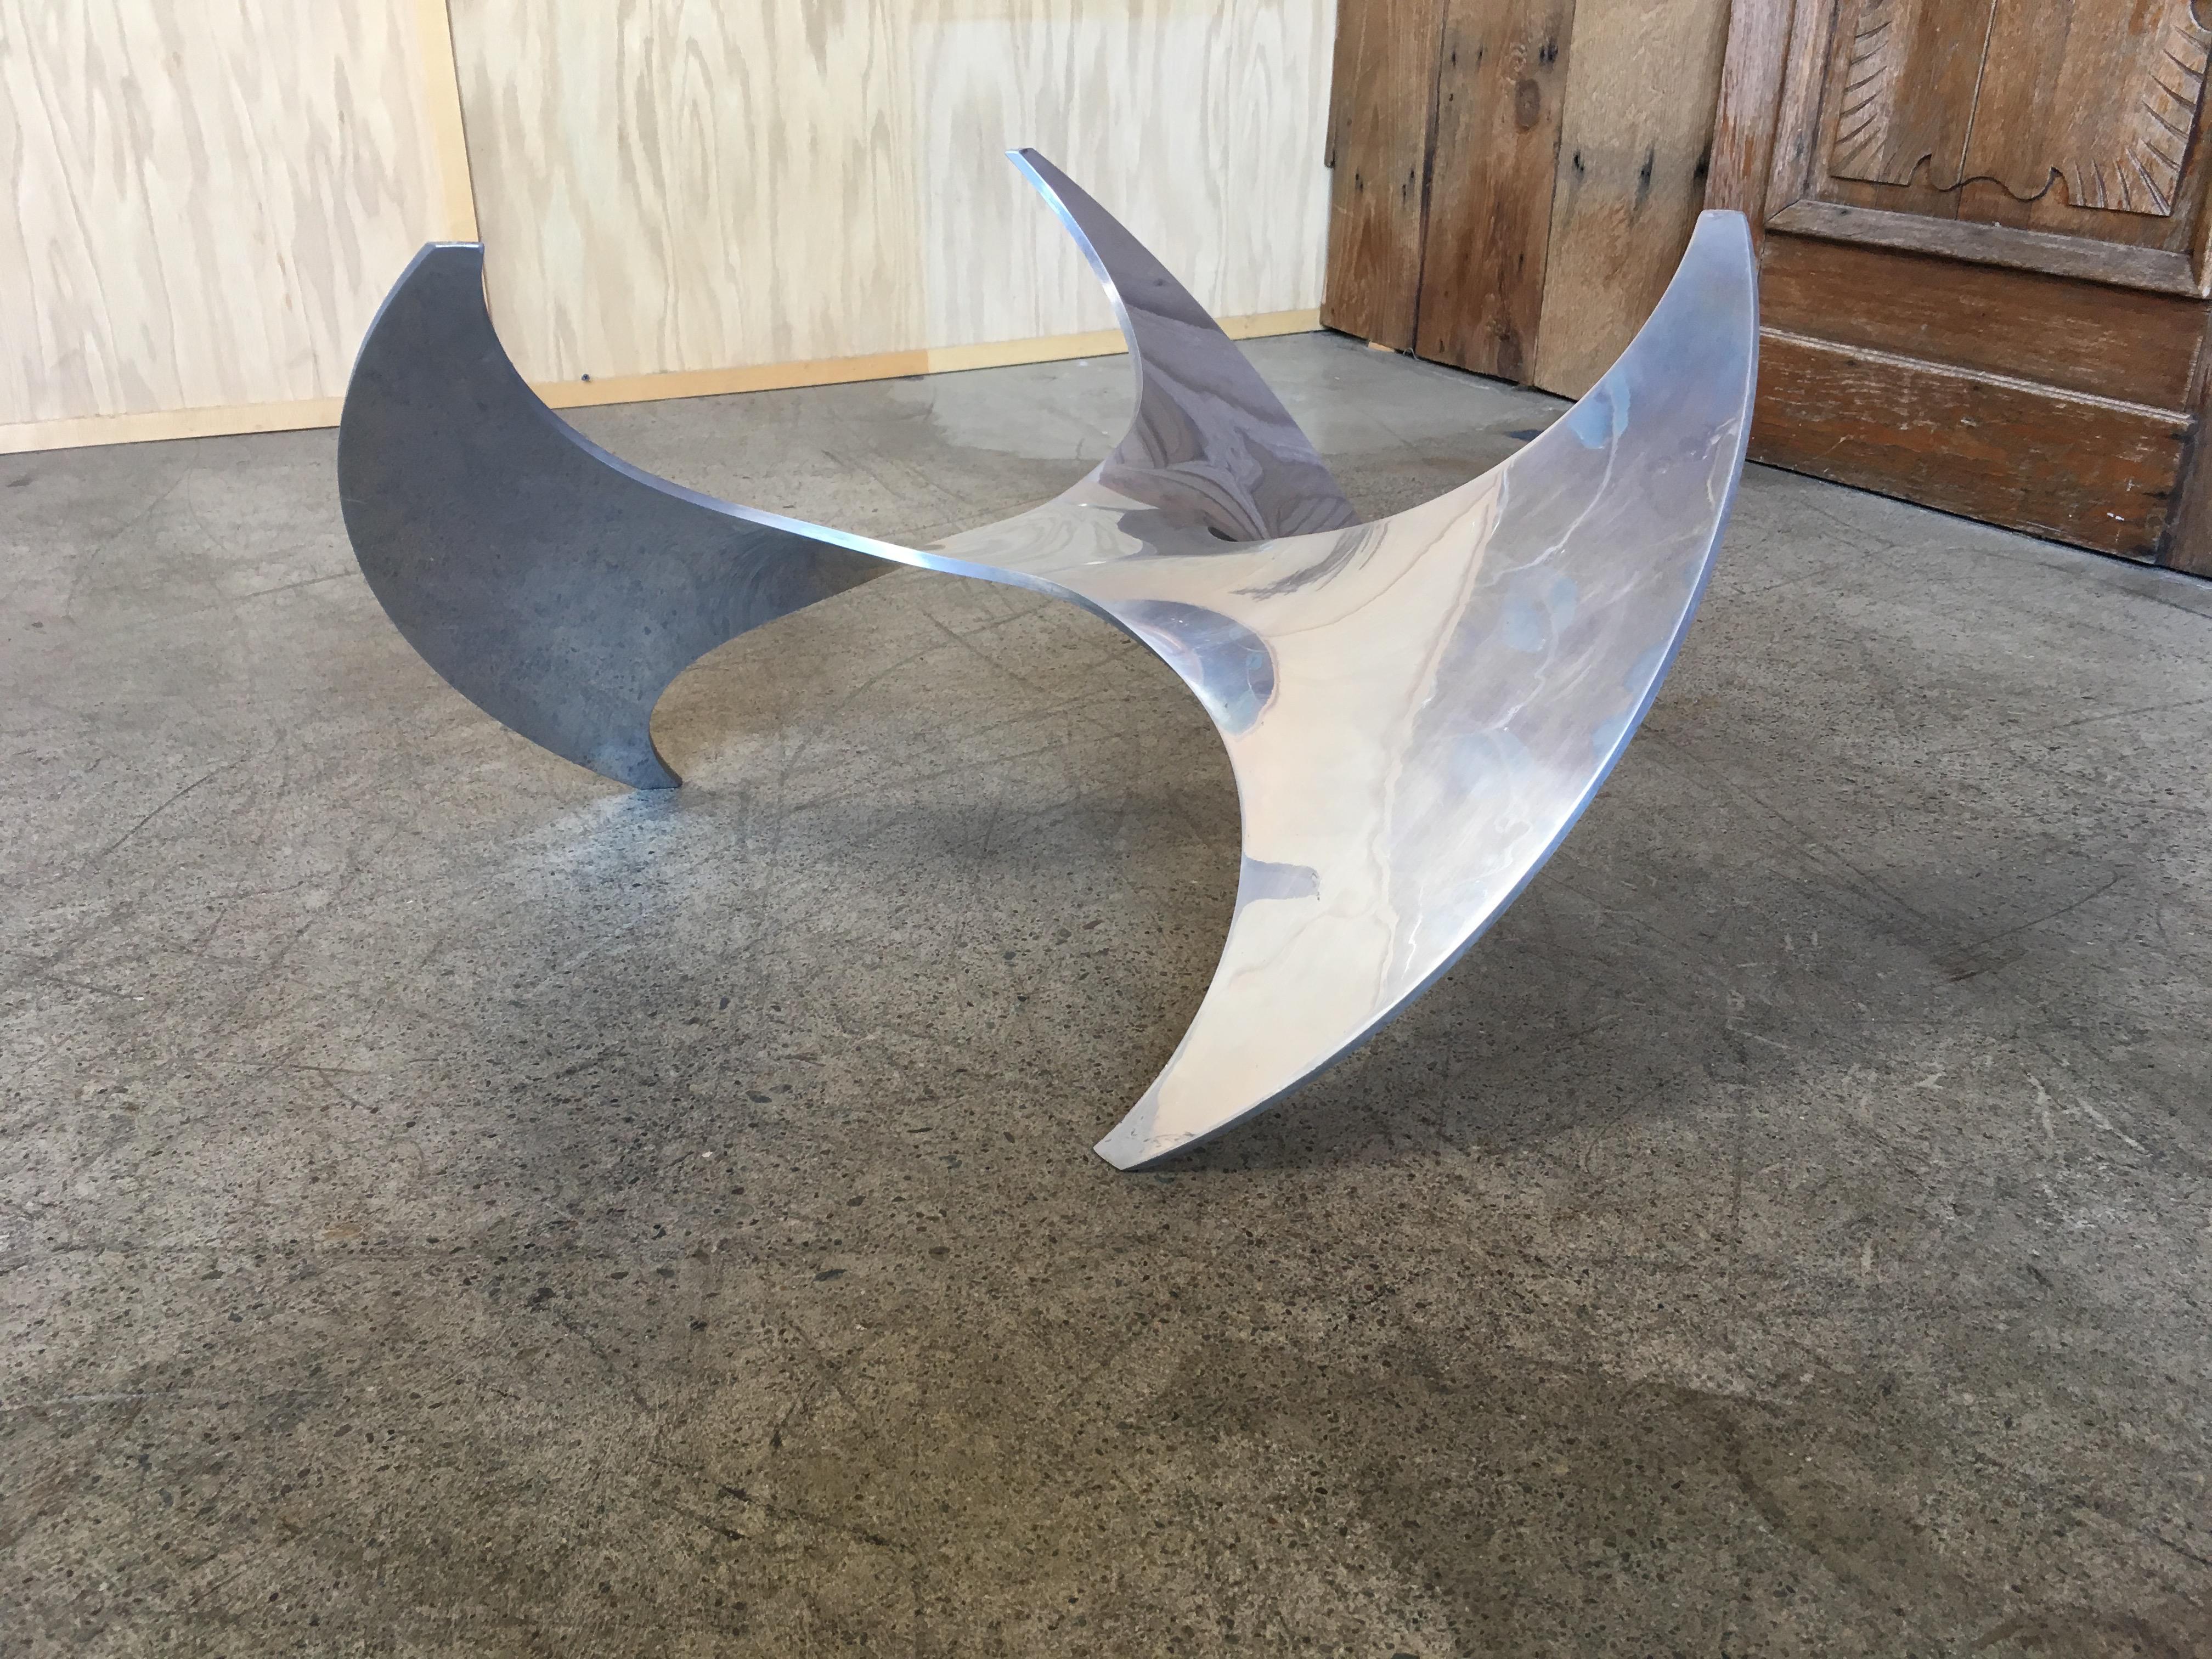 German Aluminium and Glass Propeller Table by Knut Hesterberg